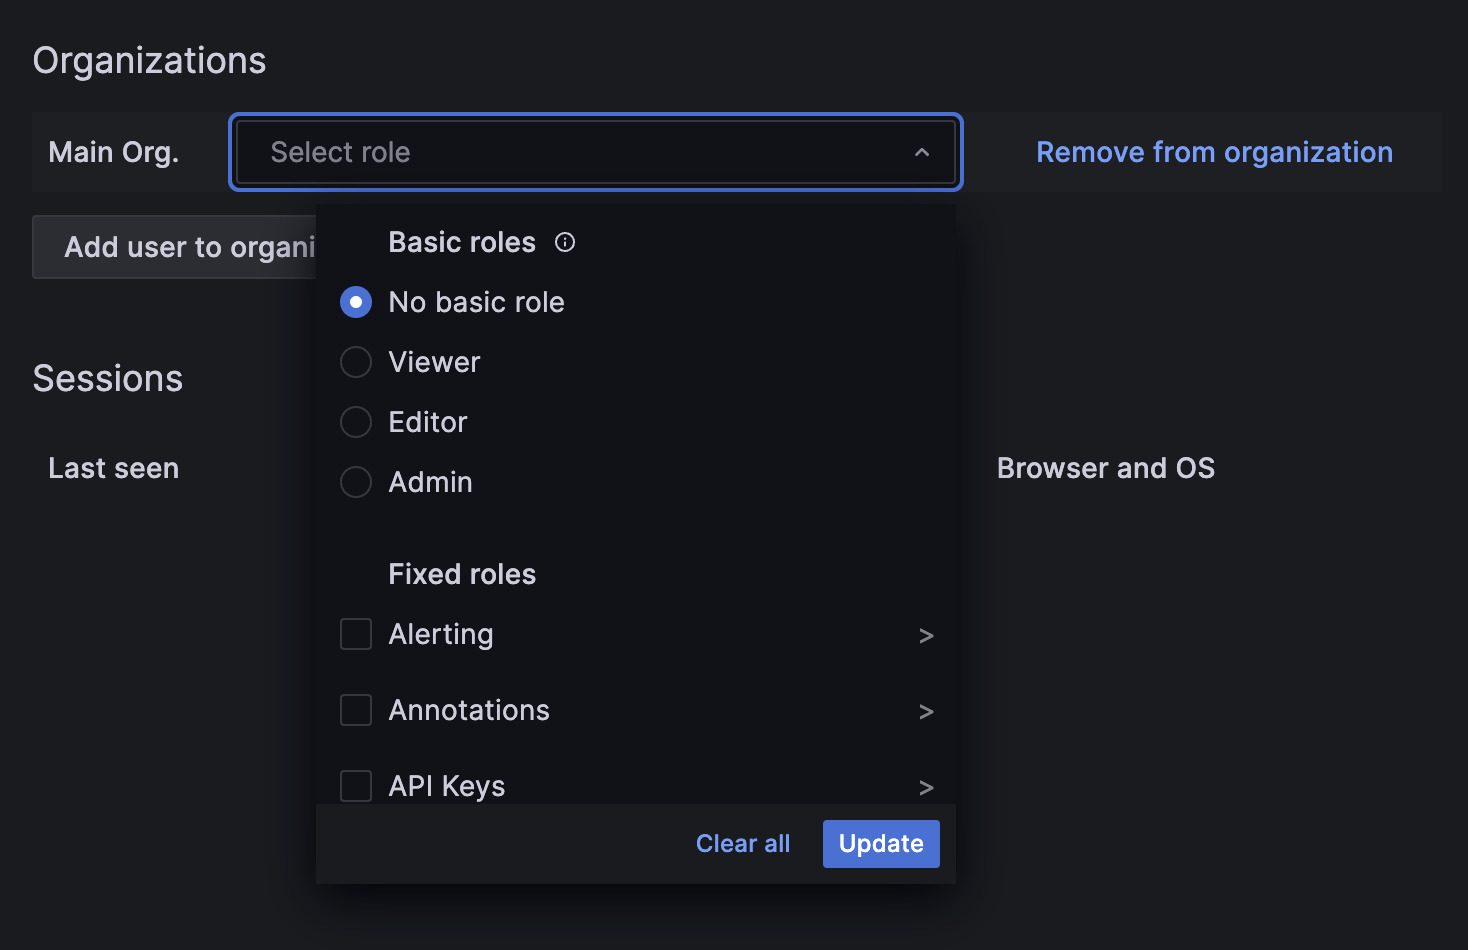 A screenshot of No basic role being selected from a drop-down menu in Grafana